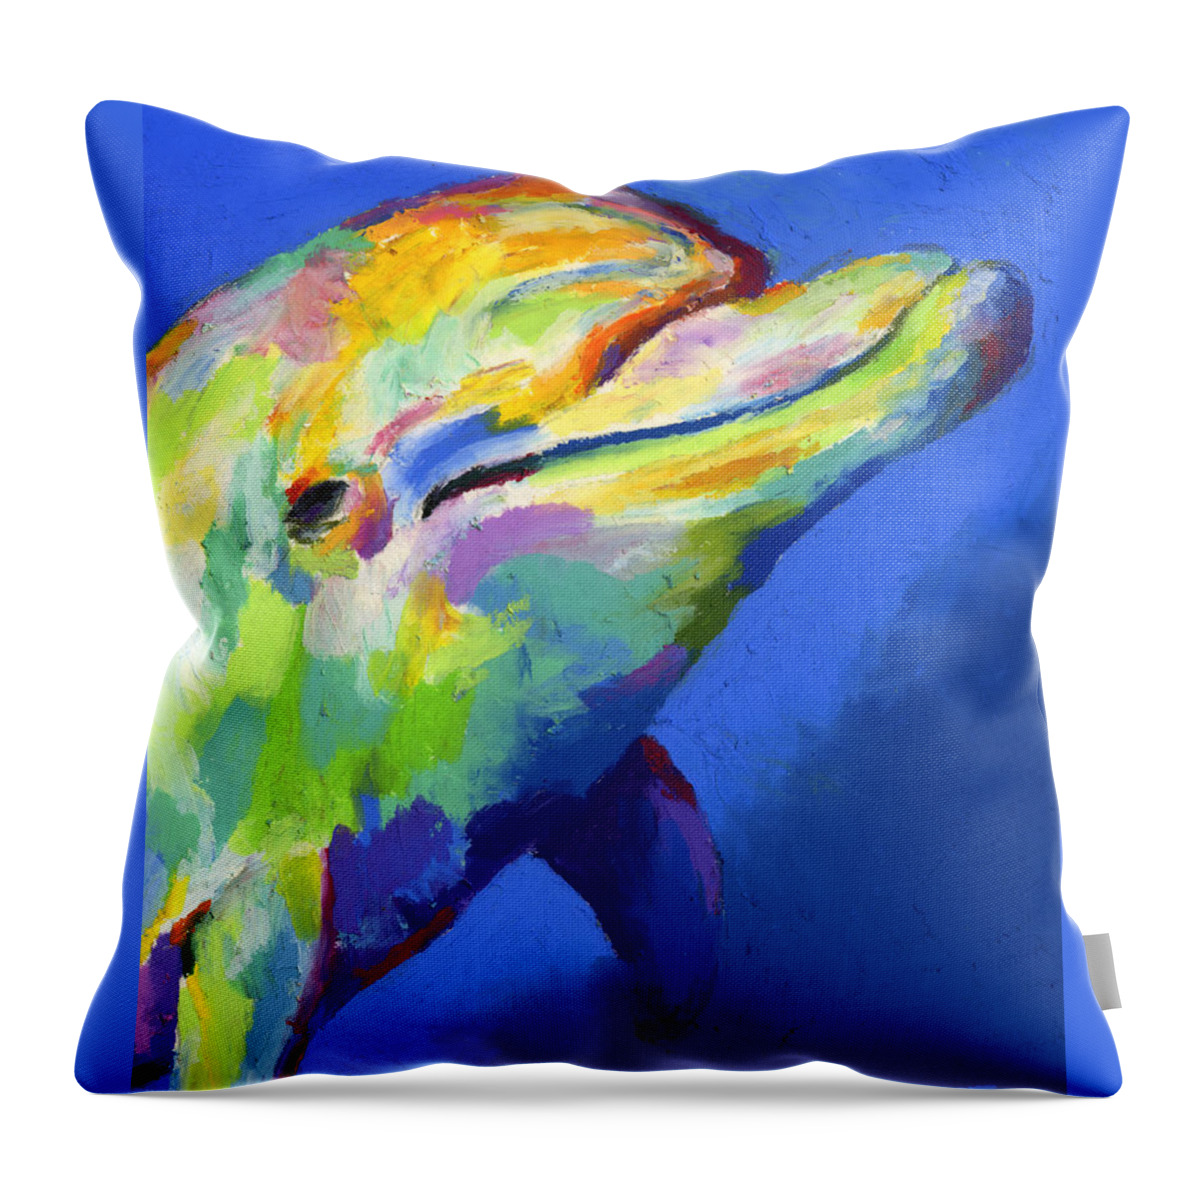 Dolphin Throw Pillow featuring the painting Born To Live Free by Stephen Anderson